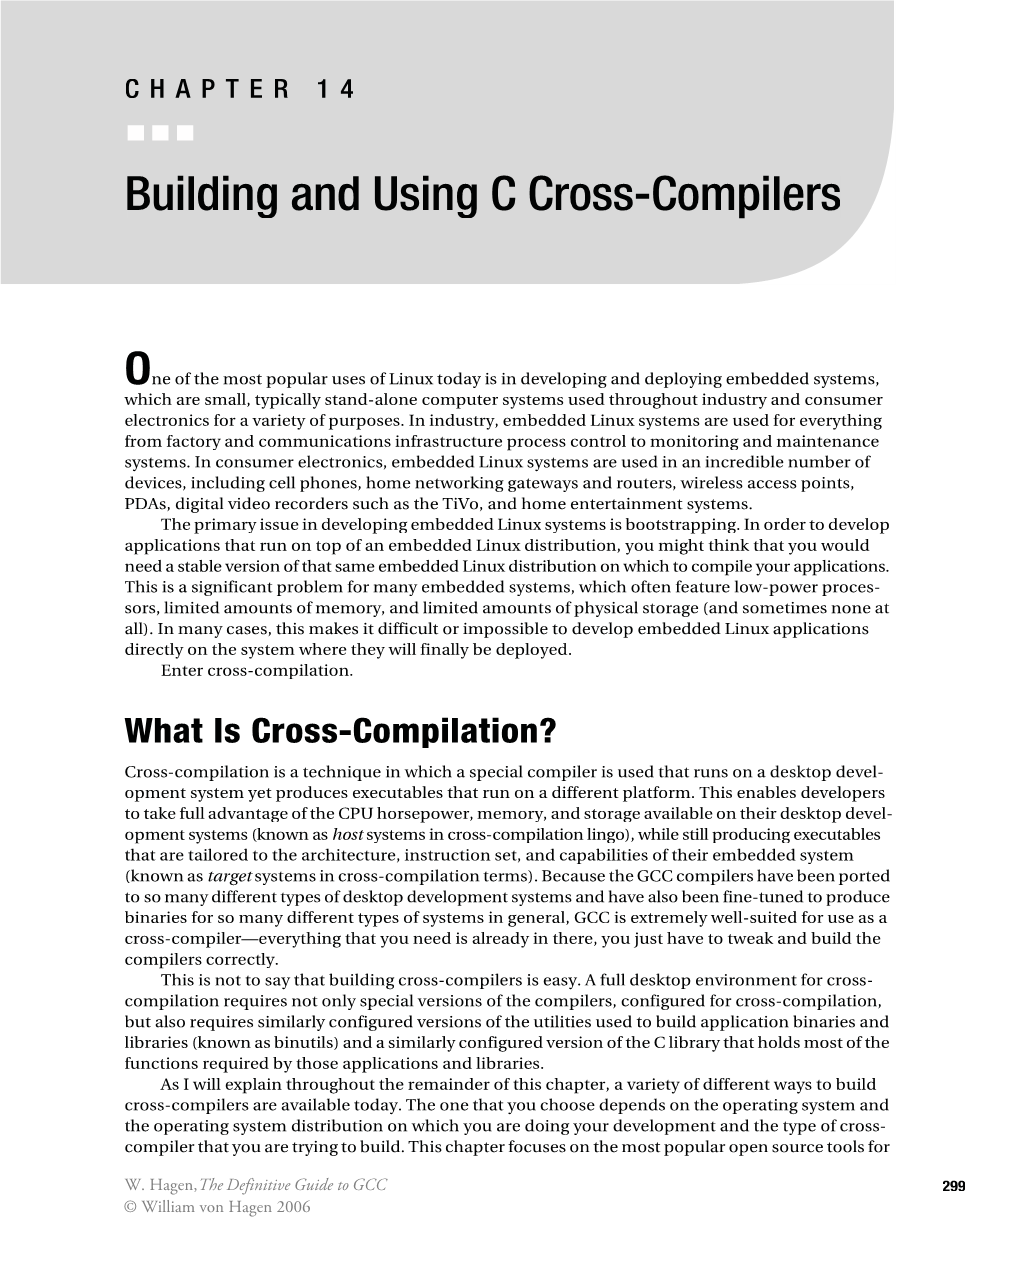 Building and Using C Cross-Compilers